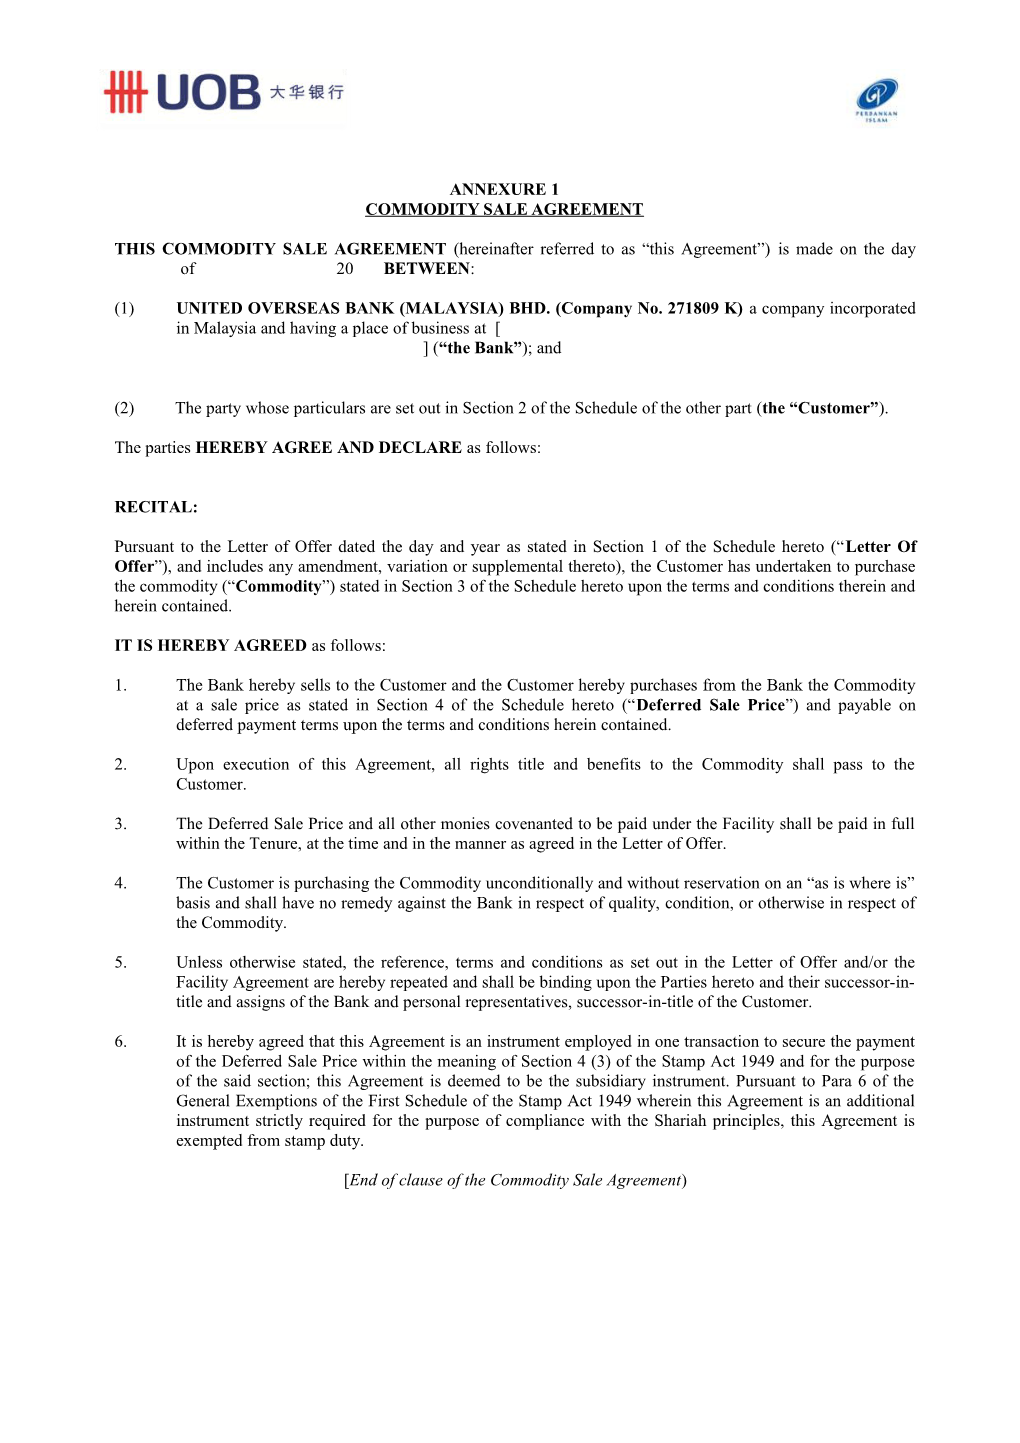 AGMT - Commodity Sale Agreement Annexure 2 to LO (00403529)